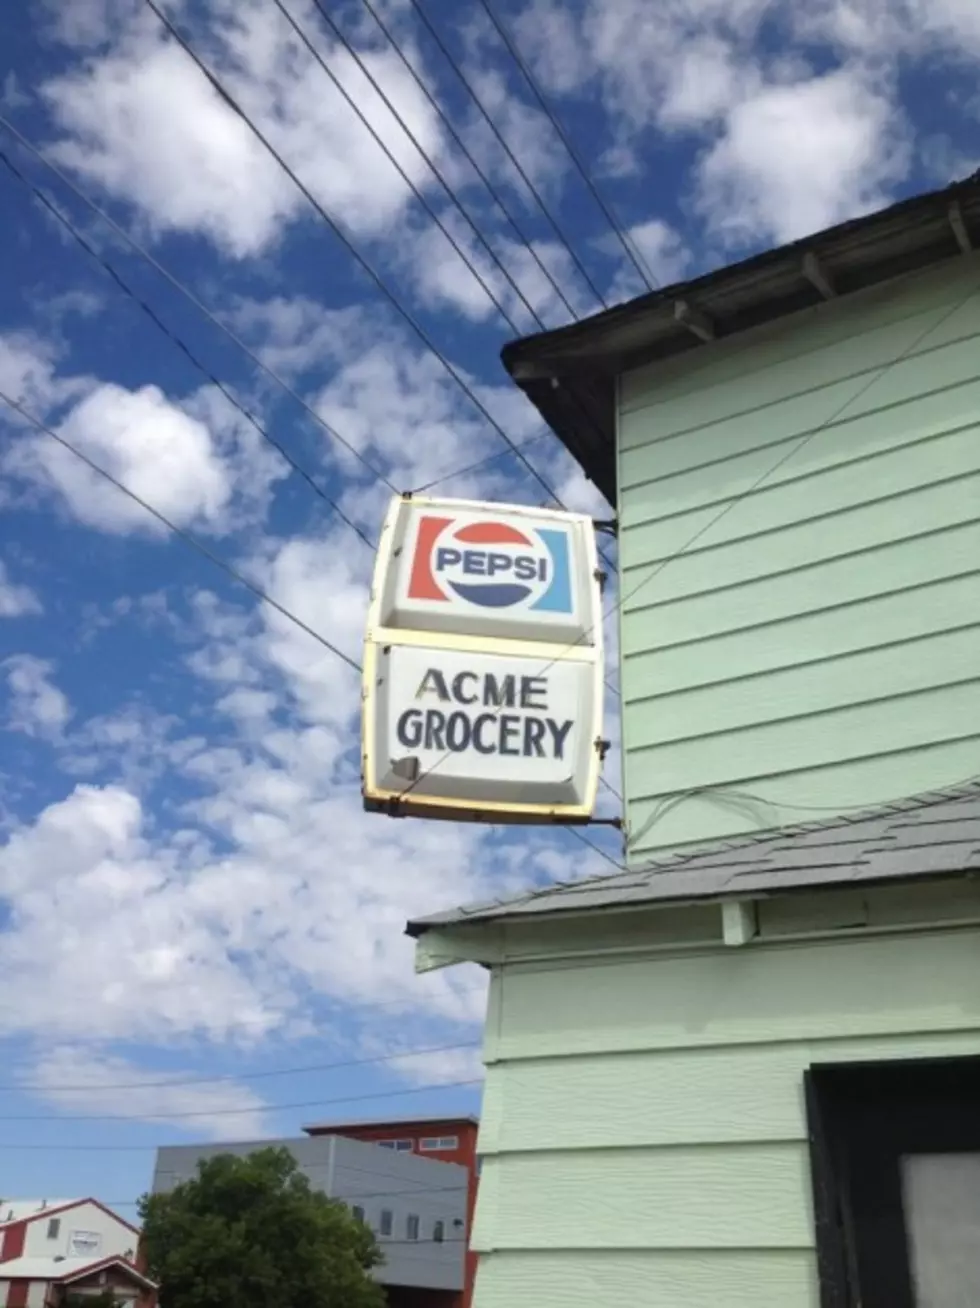 Marilyn Durham To Tell Us More About ACME GROCERY